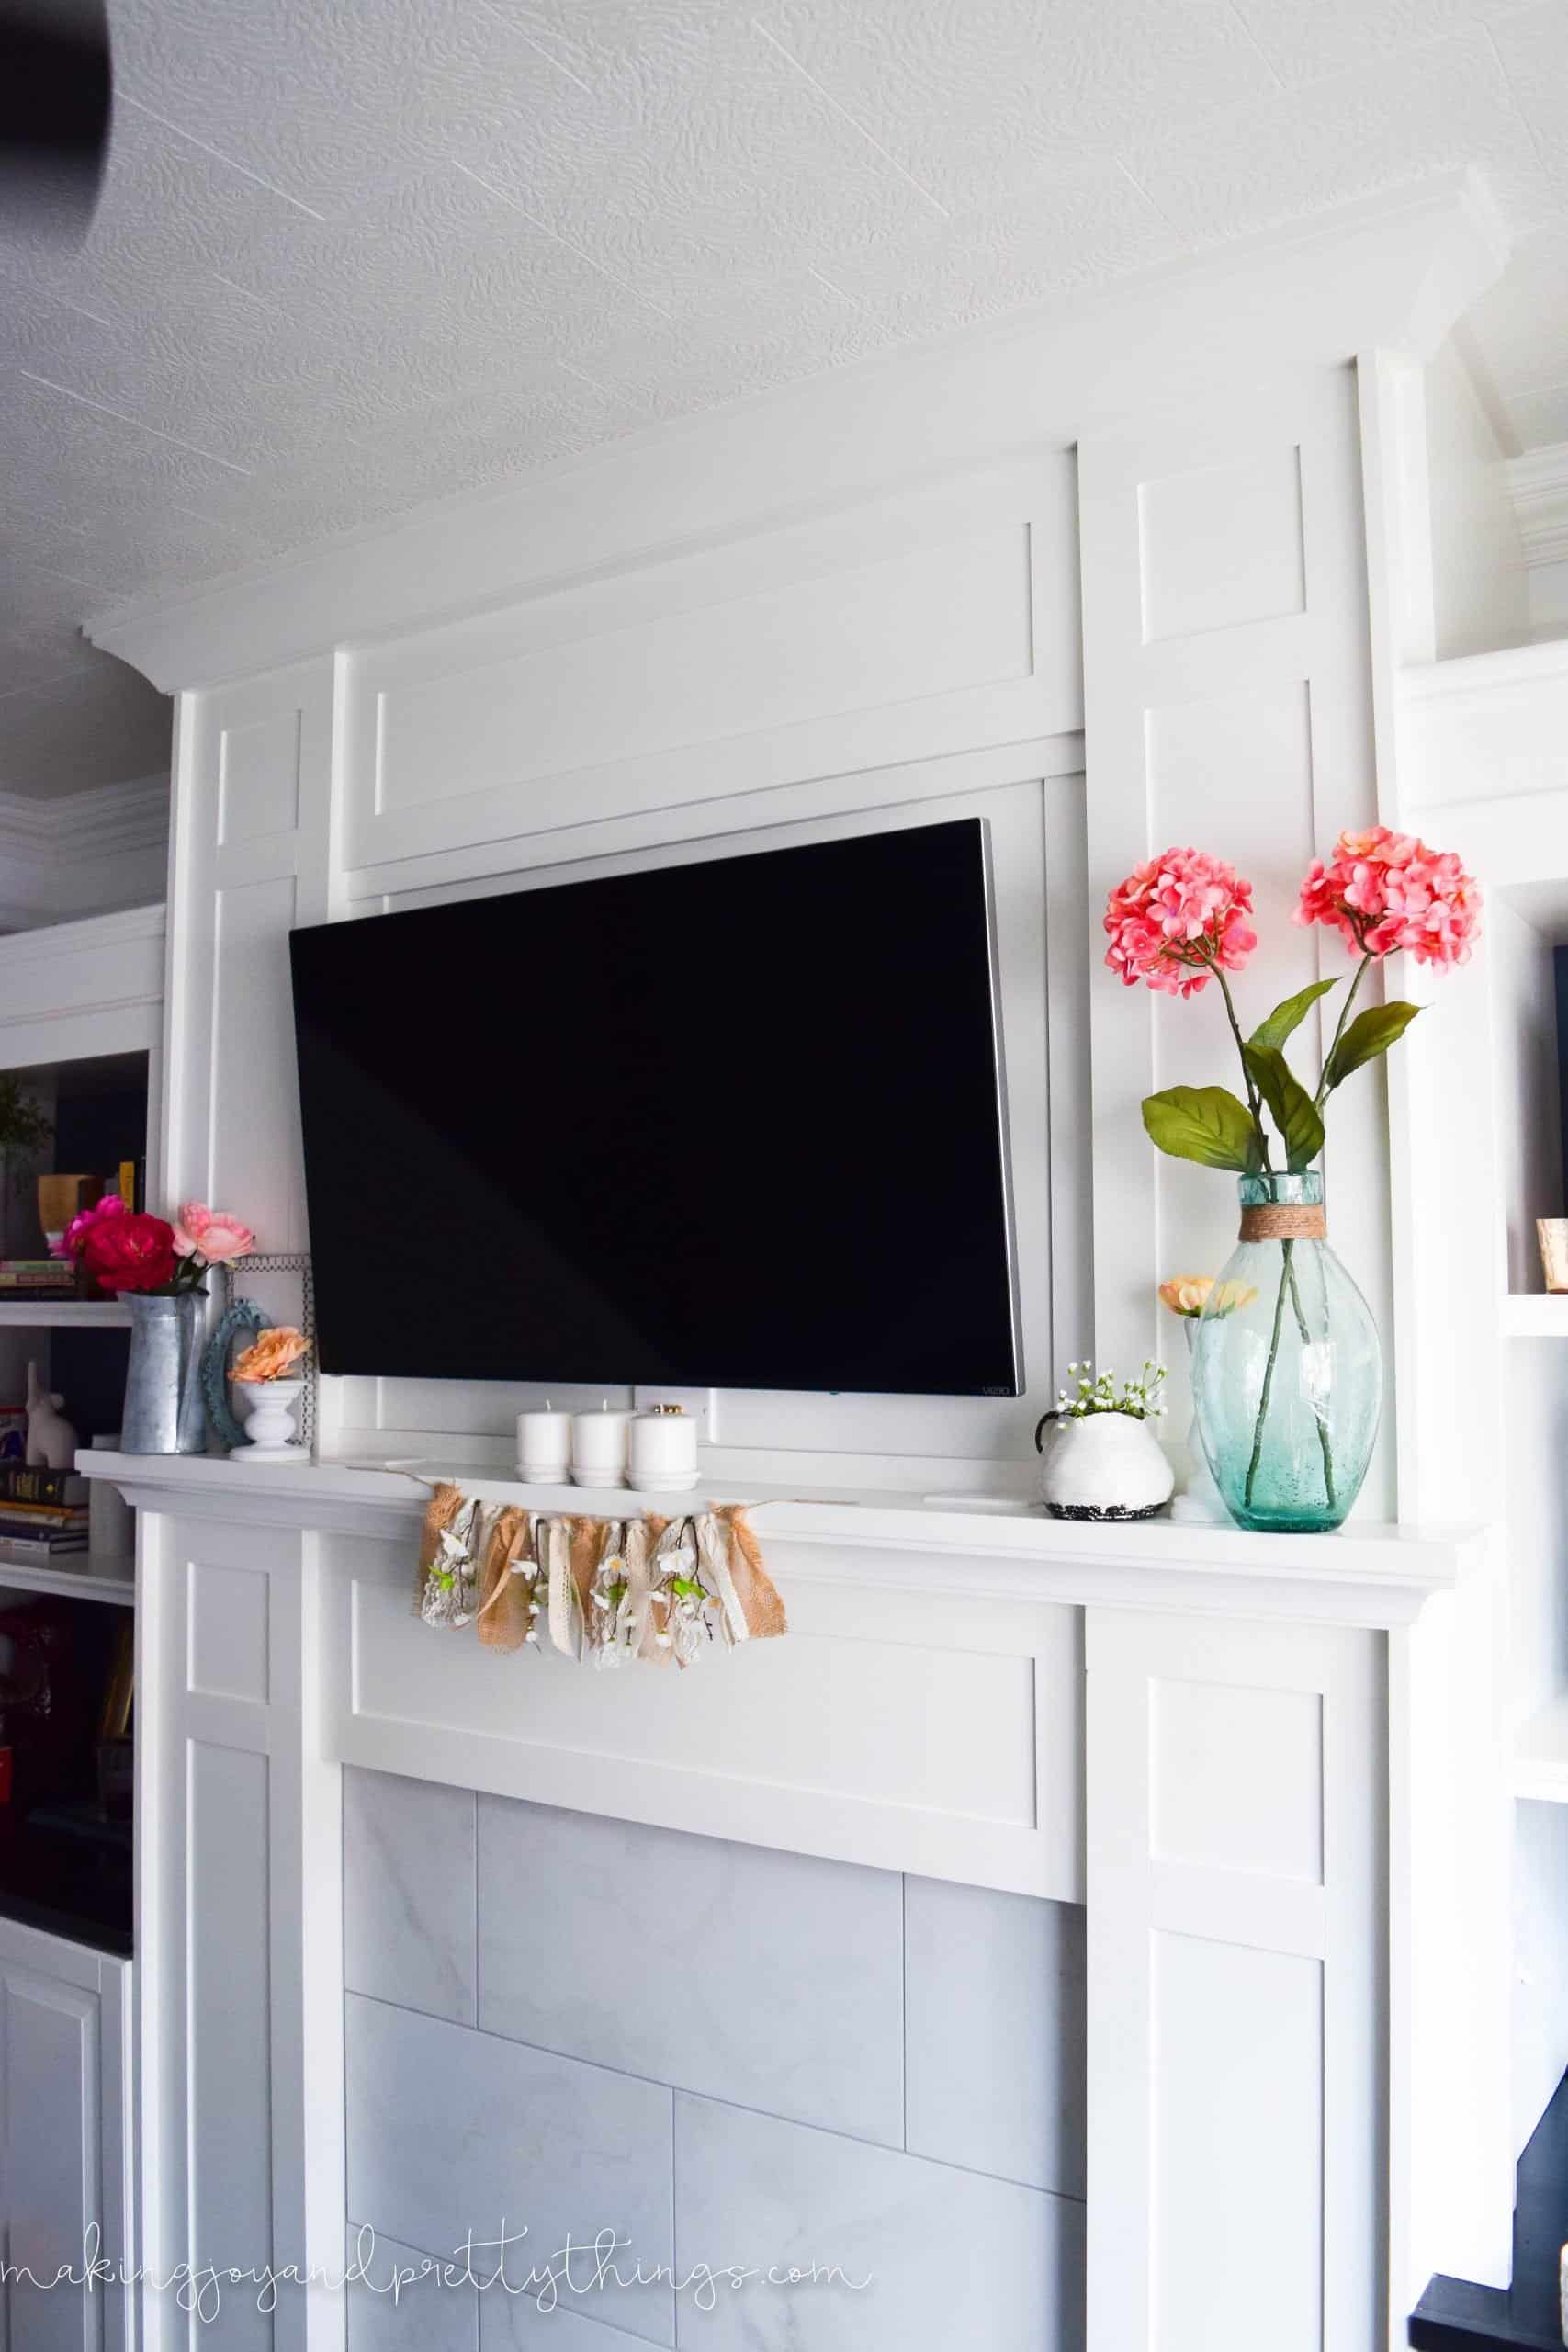 Another angle of our summer mantle decor - vases of bright pink faux flowers, pottery, and candles surround a wall-mounted flat screen TV above a white wood and marble mantle.